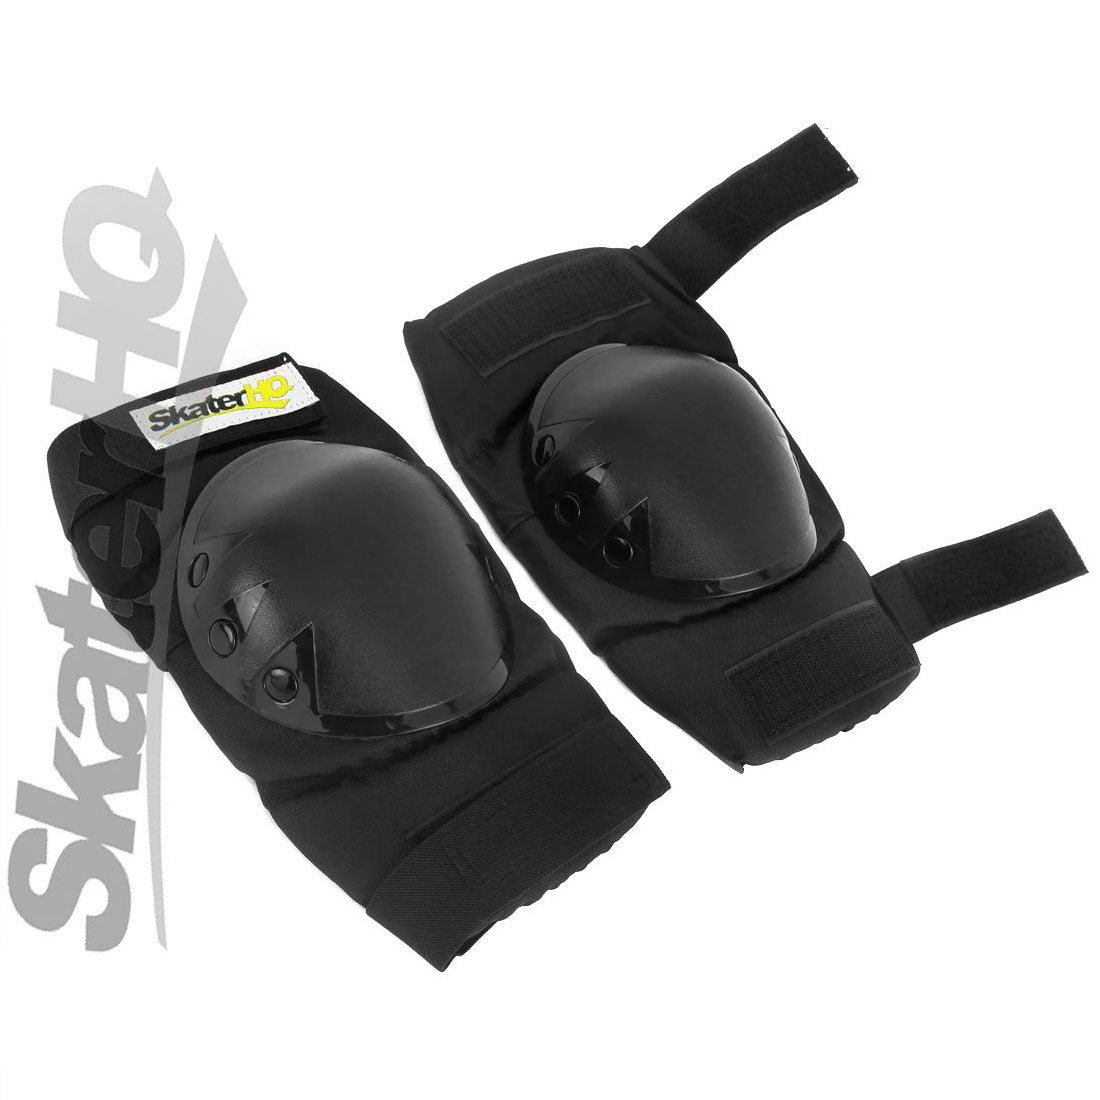 Skater HQ Knee Pads - XLarge Protective Gear